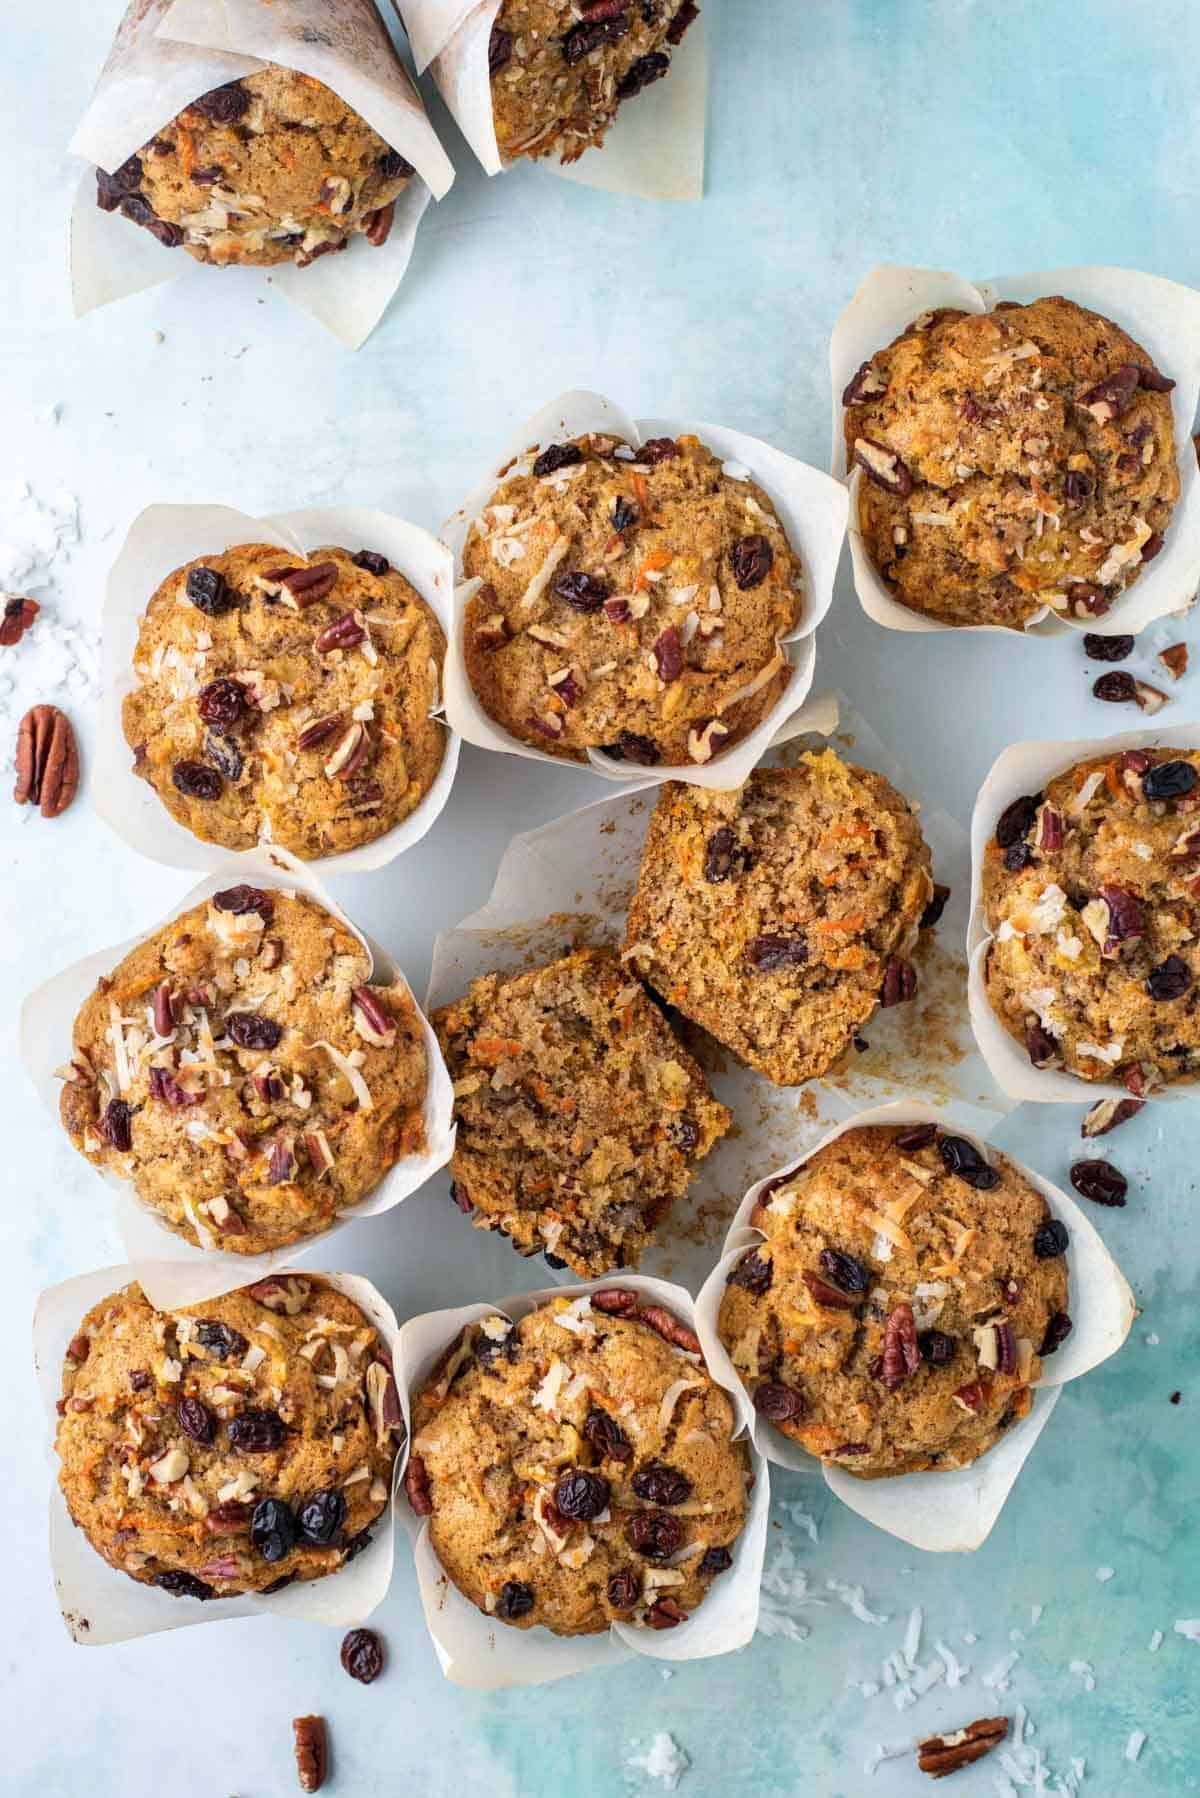 one morning glory muffin cut in half inside muffin paper surrounded by several more muffins, nuts, raisins and coconut shreds